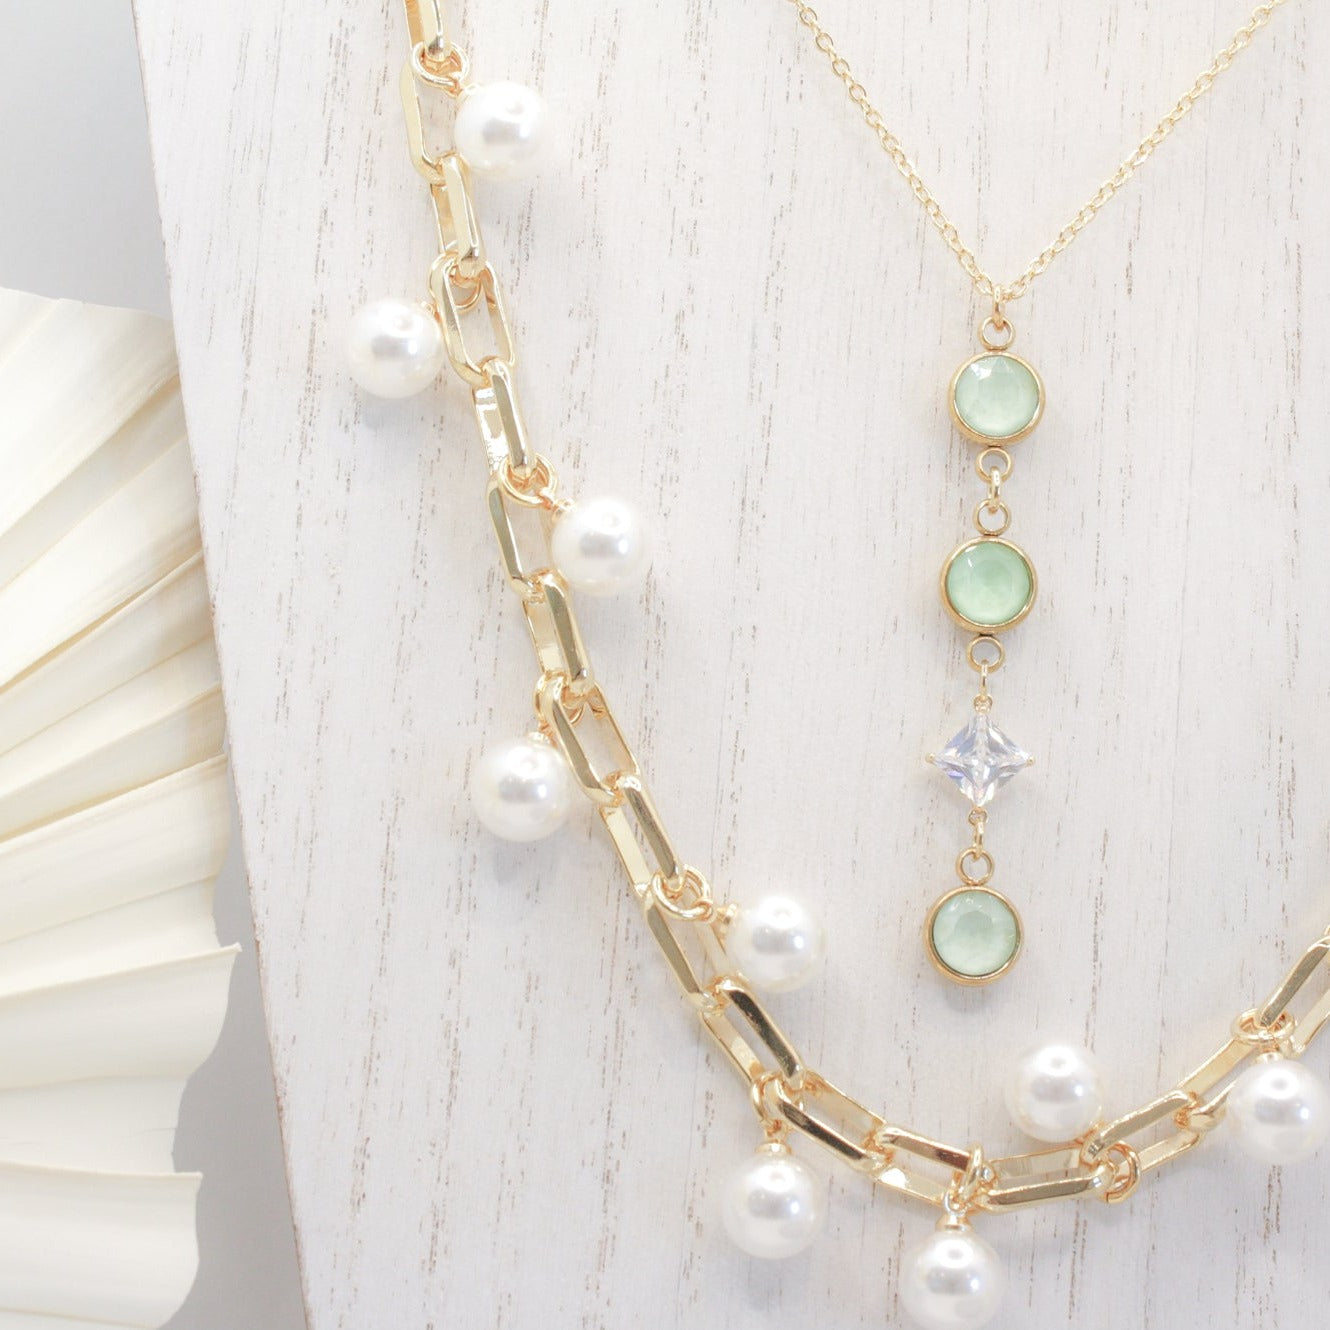 Chloe Pearl Statement Necklace